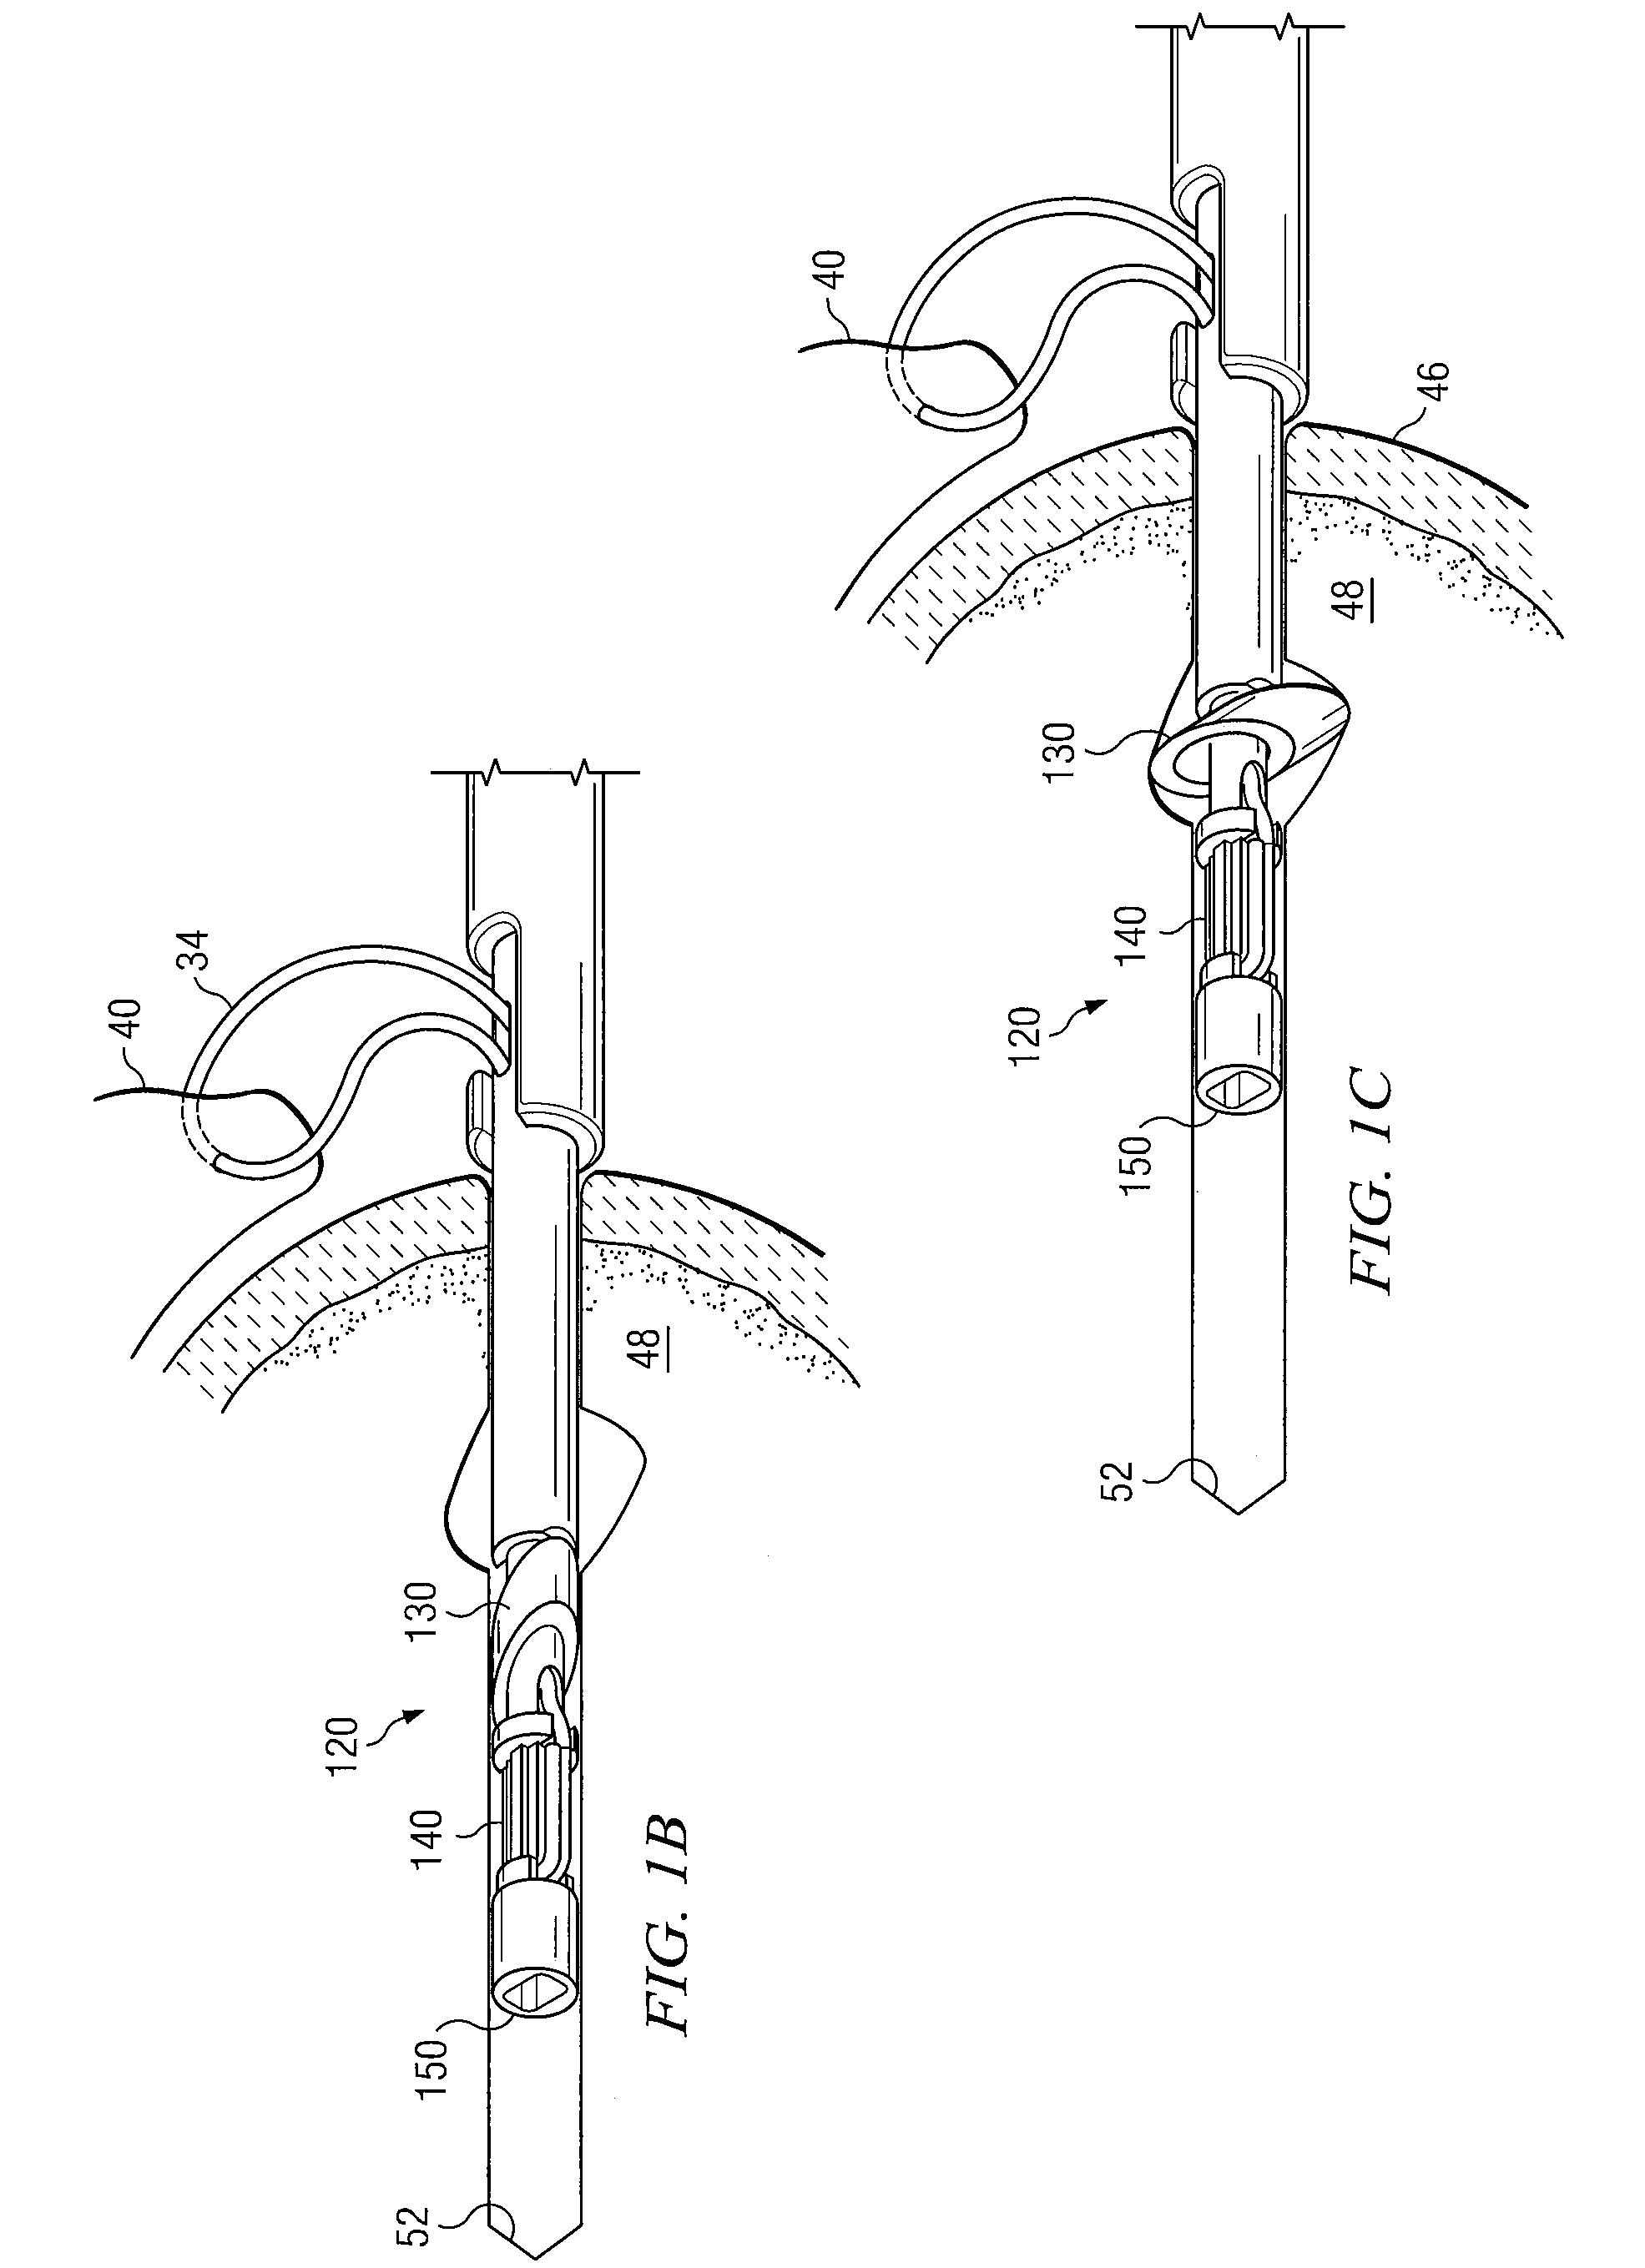 Knotless suture anchor having discrete polymer components and related methods